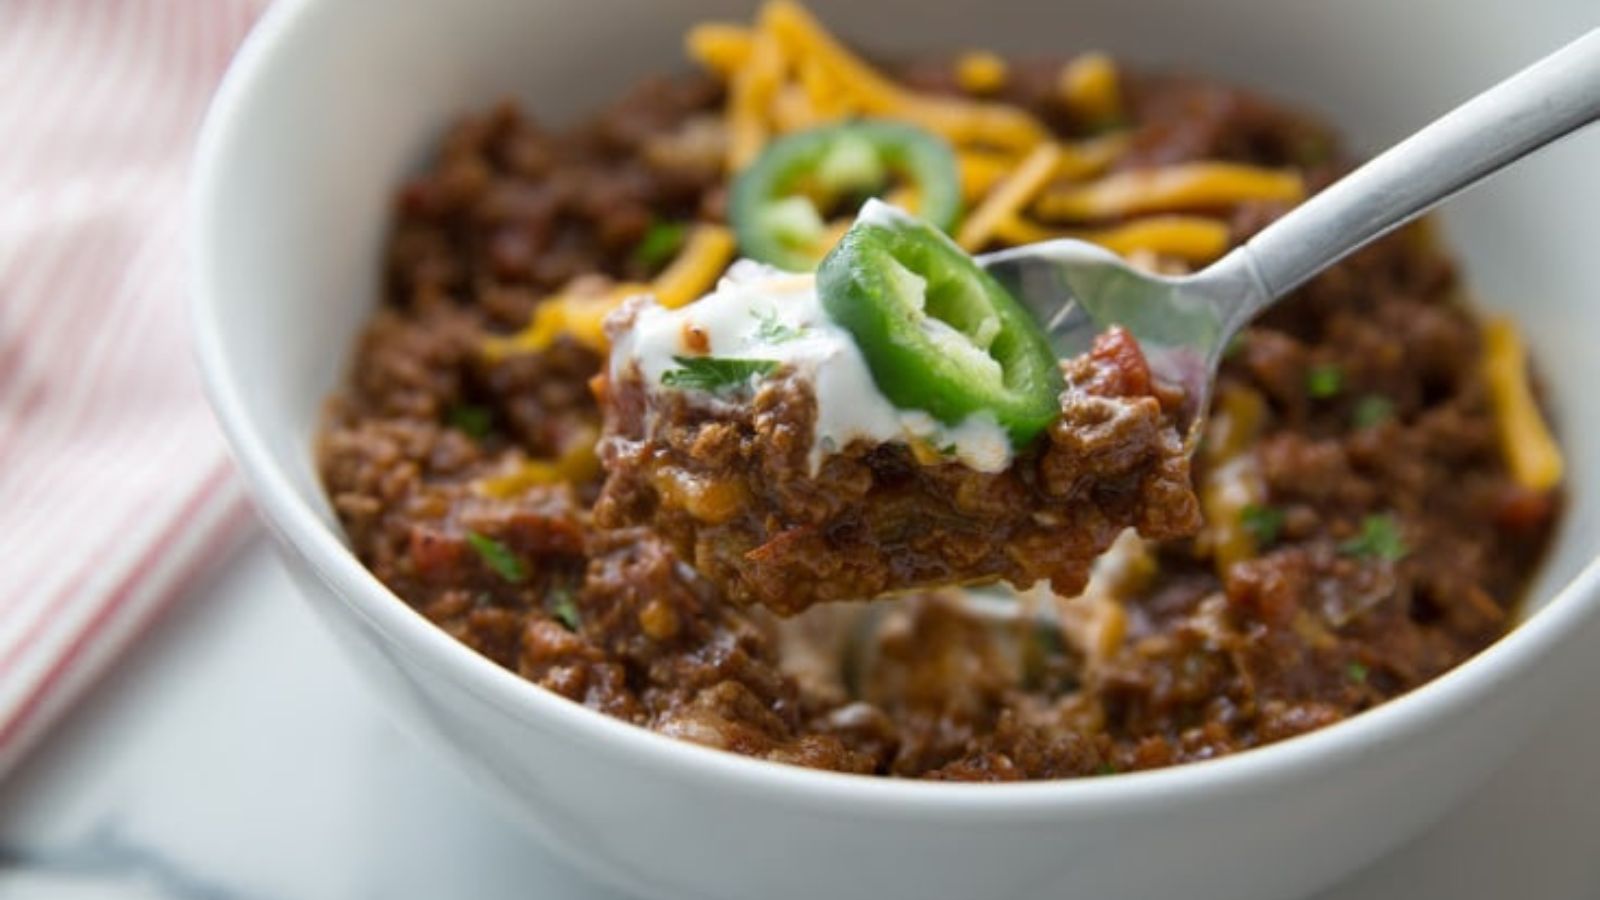 Conquer Cooking Contests with these 20 Unrivaled Chili Recipes